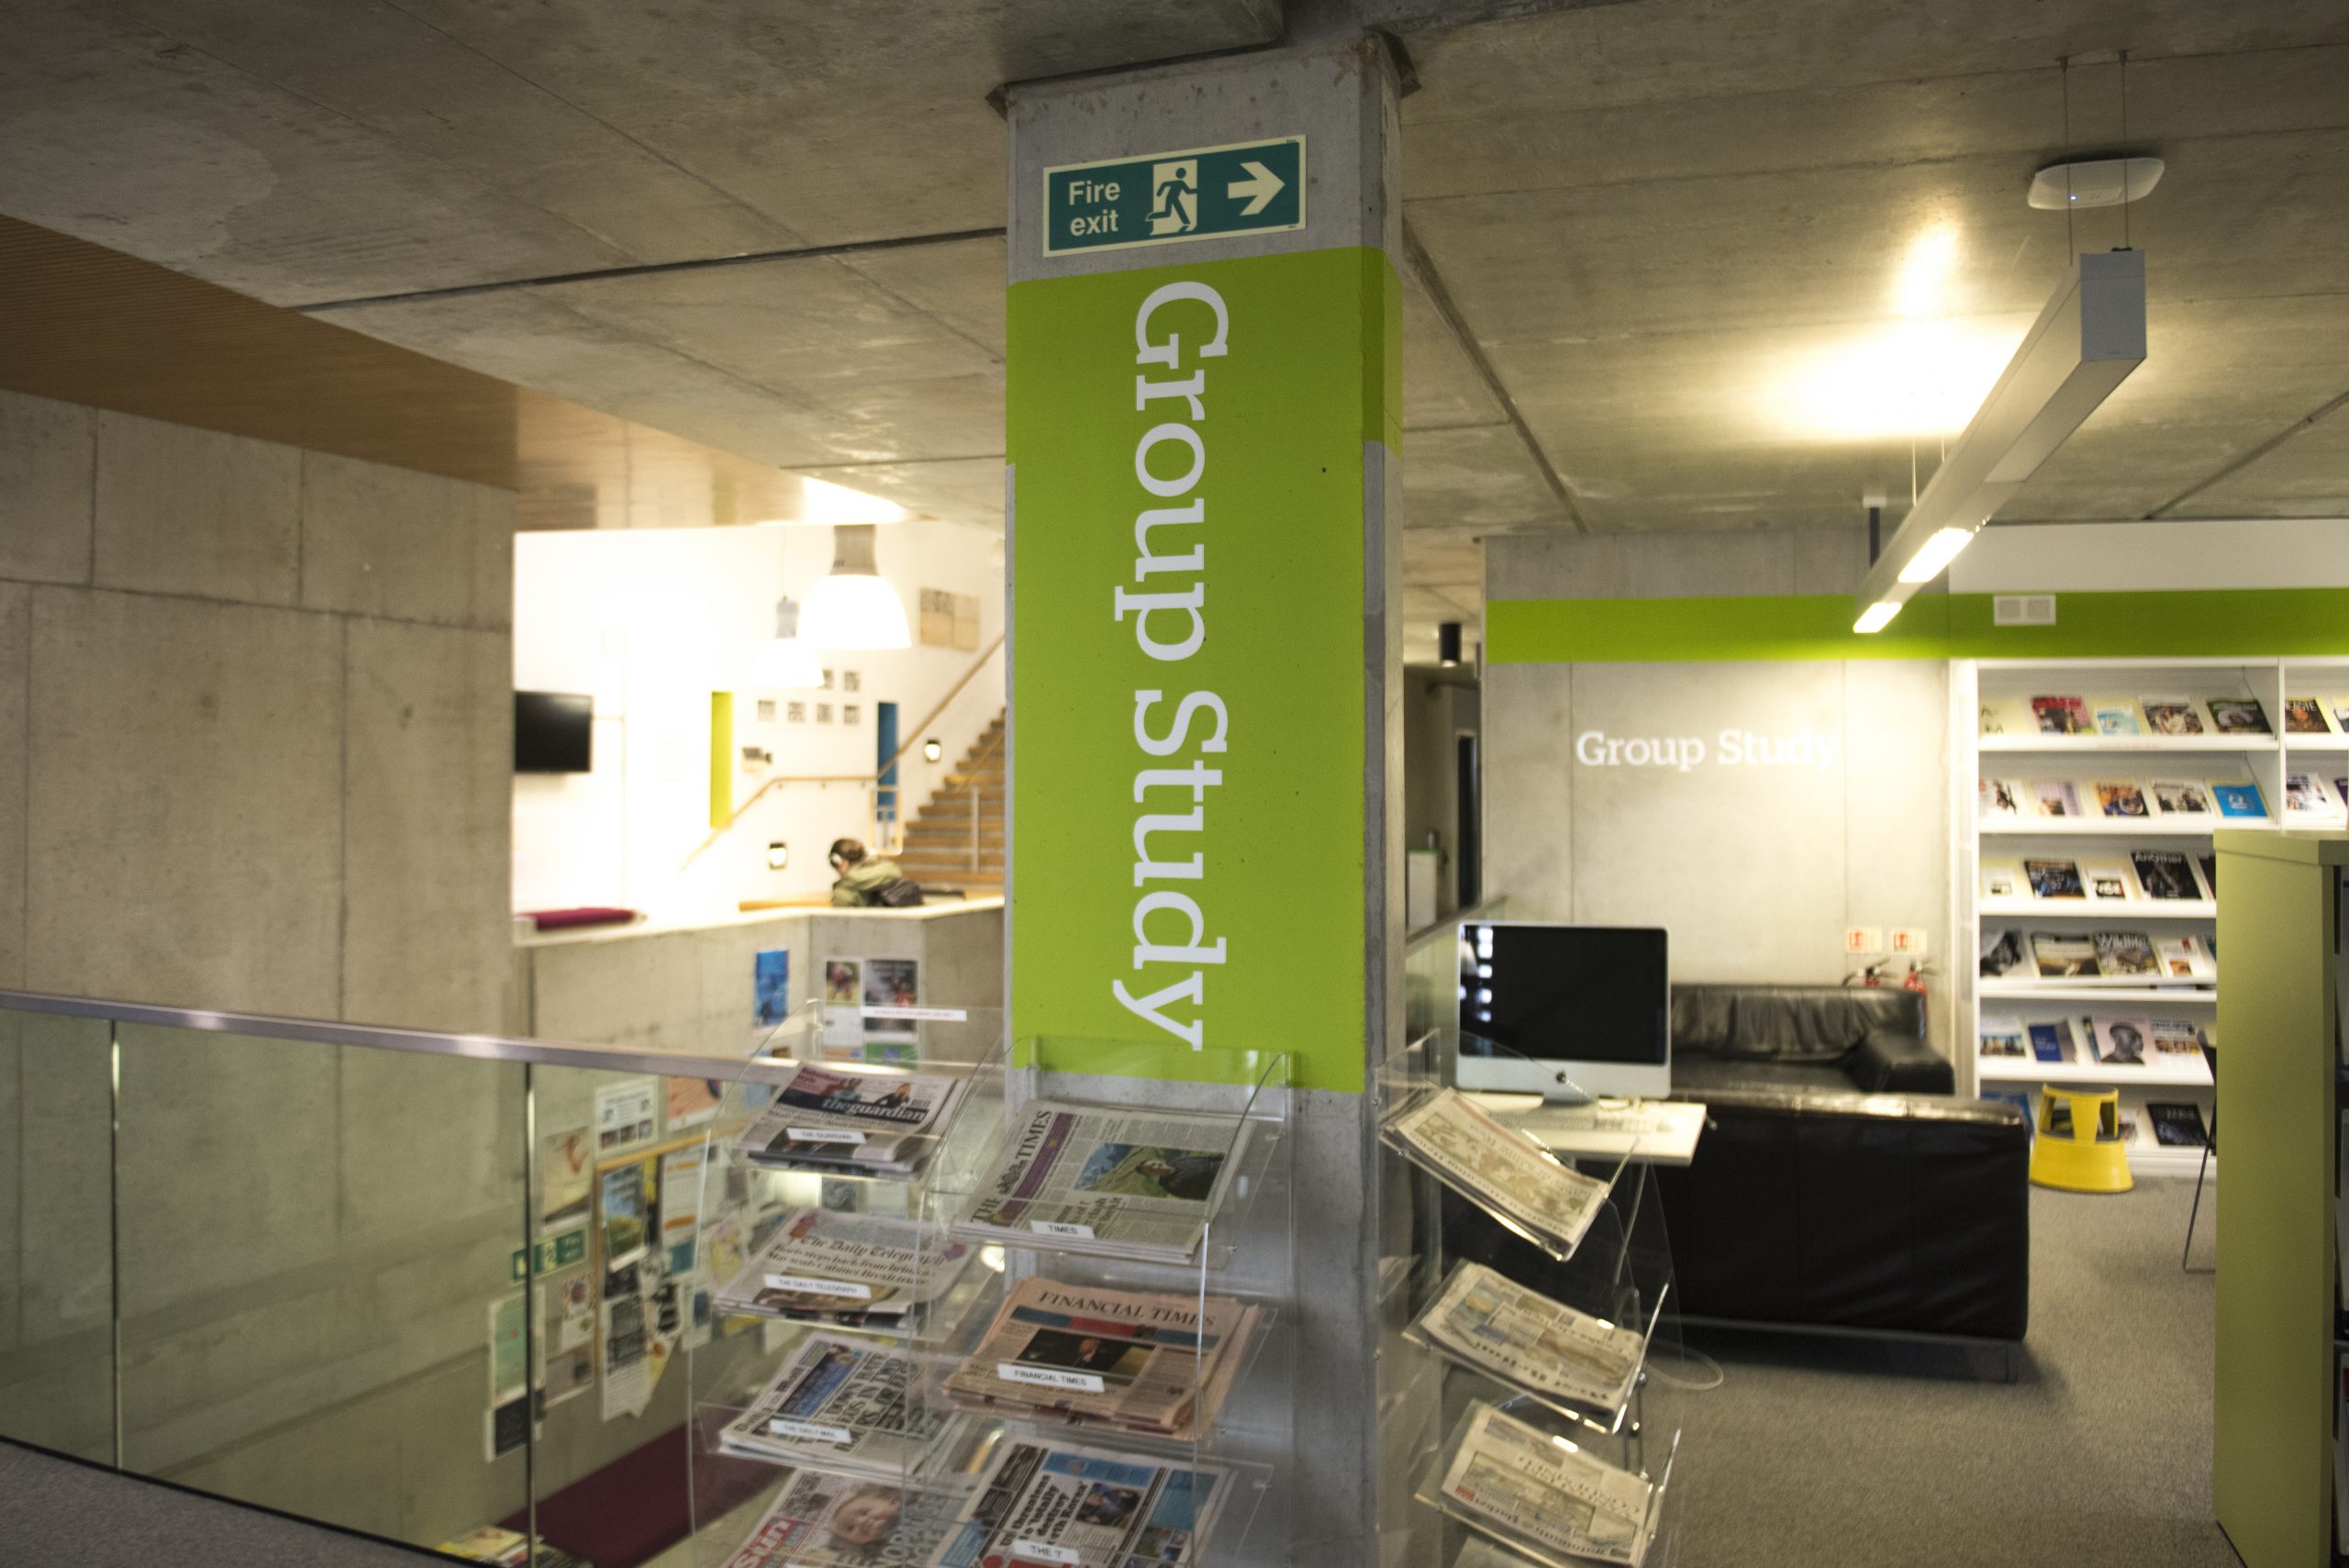 Image of a group study area at Penryn Campus